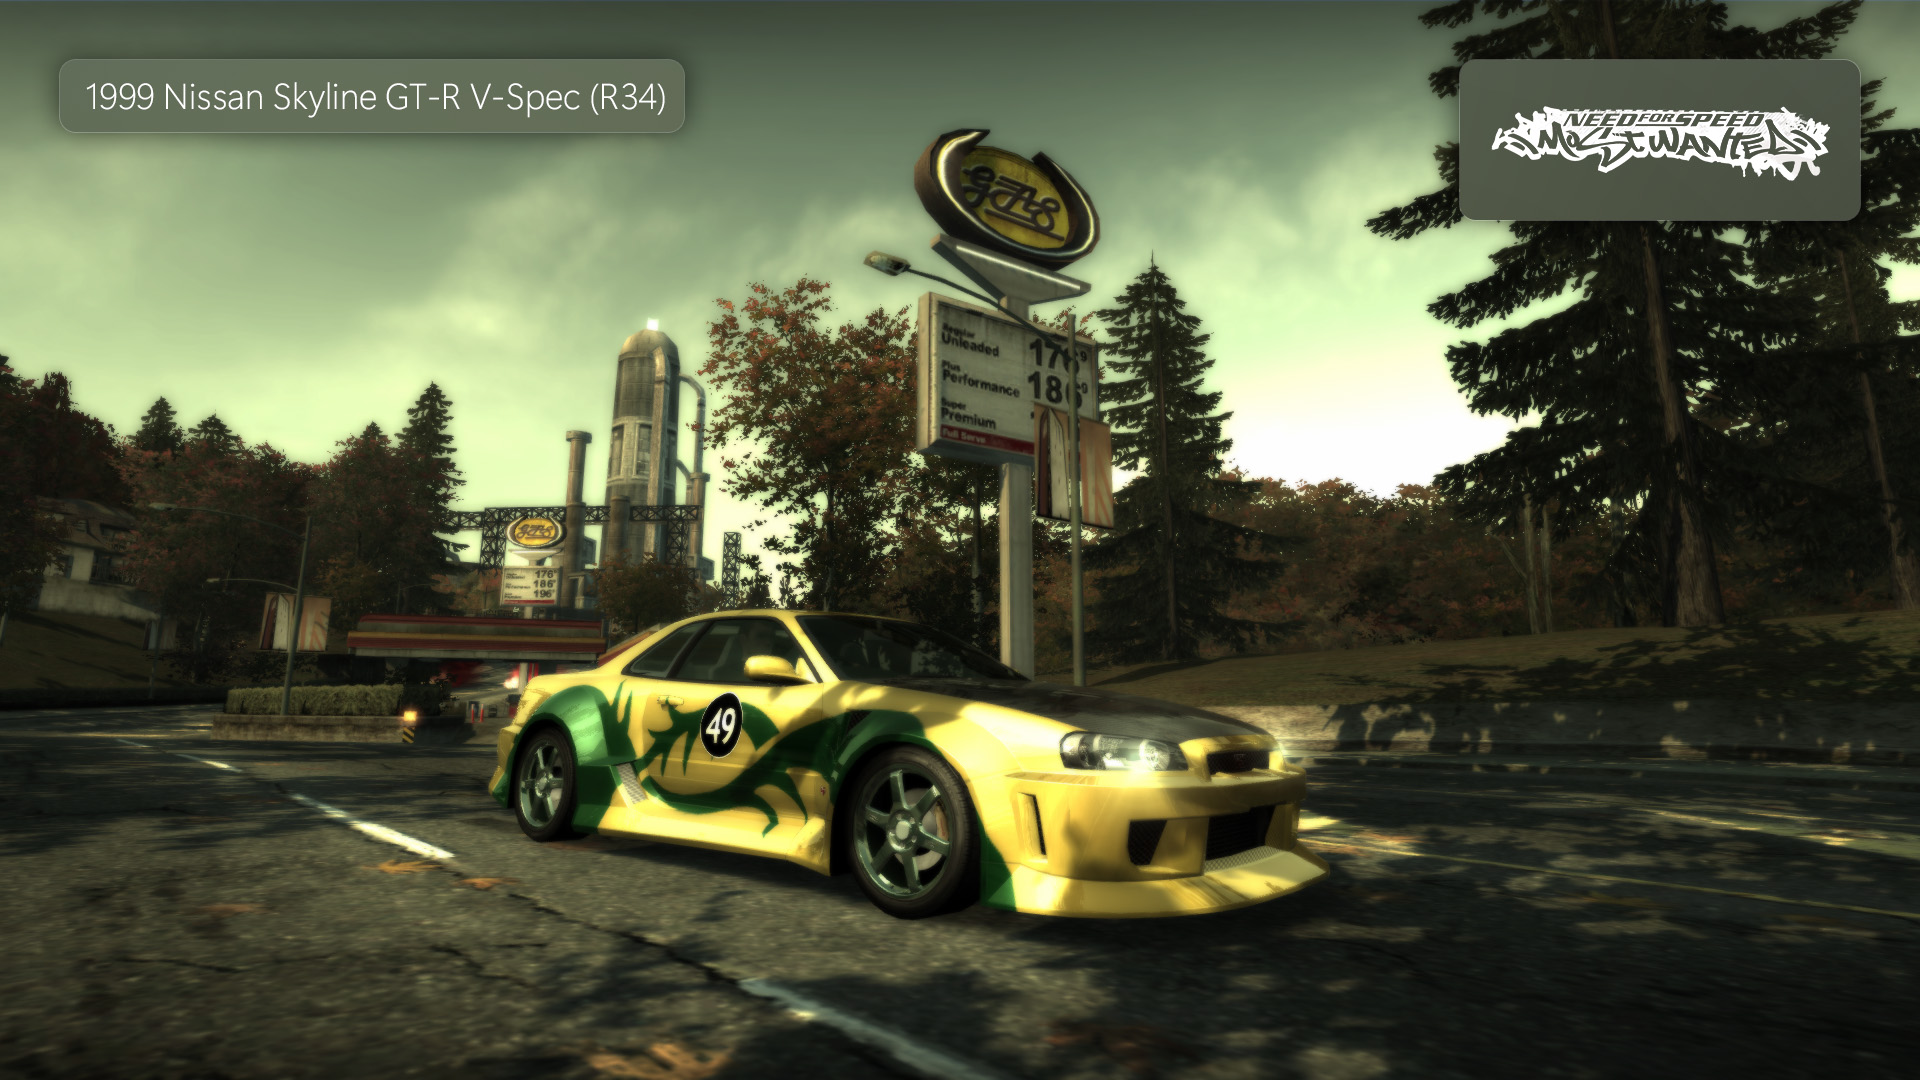 Download do APK de Need for Speed Most Wanted 2019 para Android